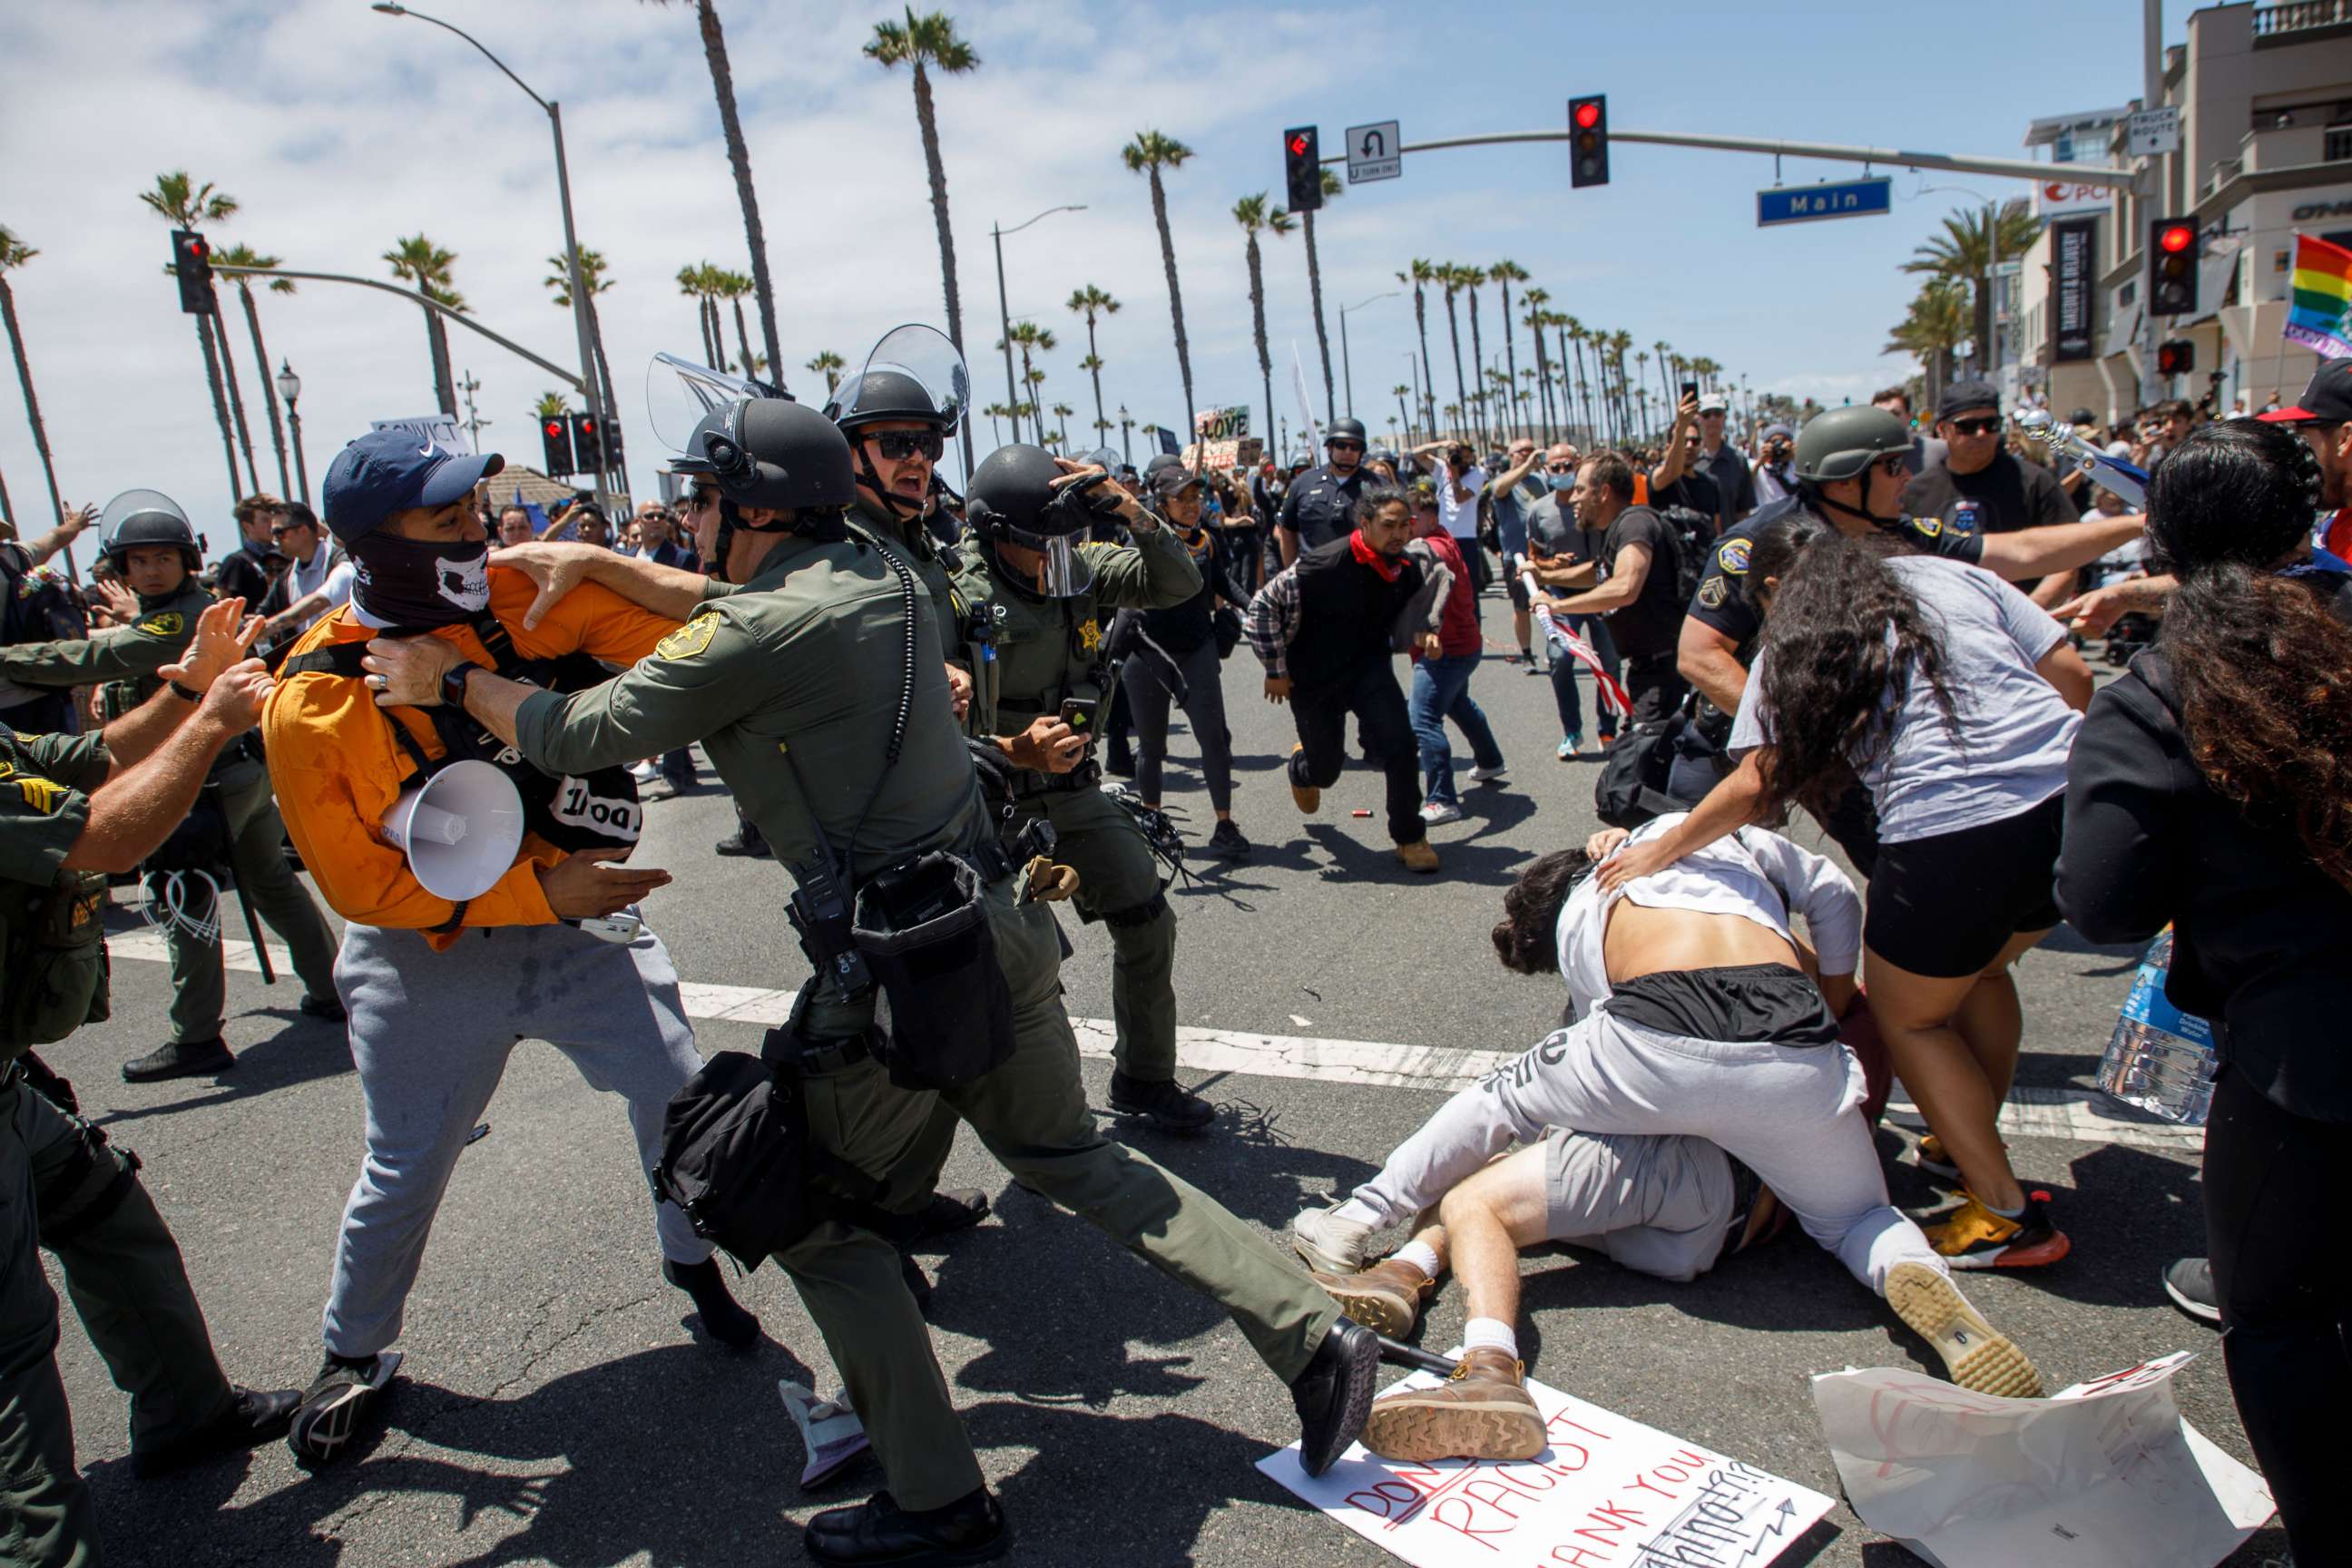 PHOTO: Black Lives Matter protesters fight with supporters of US President Donald Trump as police try to break up the clashes during a demonstration due to the police killing of George Floyd in Huntington Beach, California, June 6, 2020.